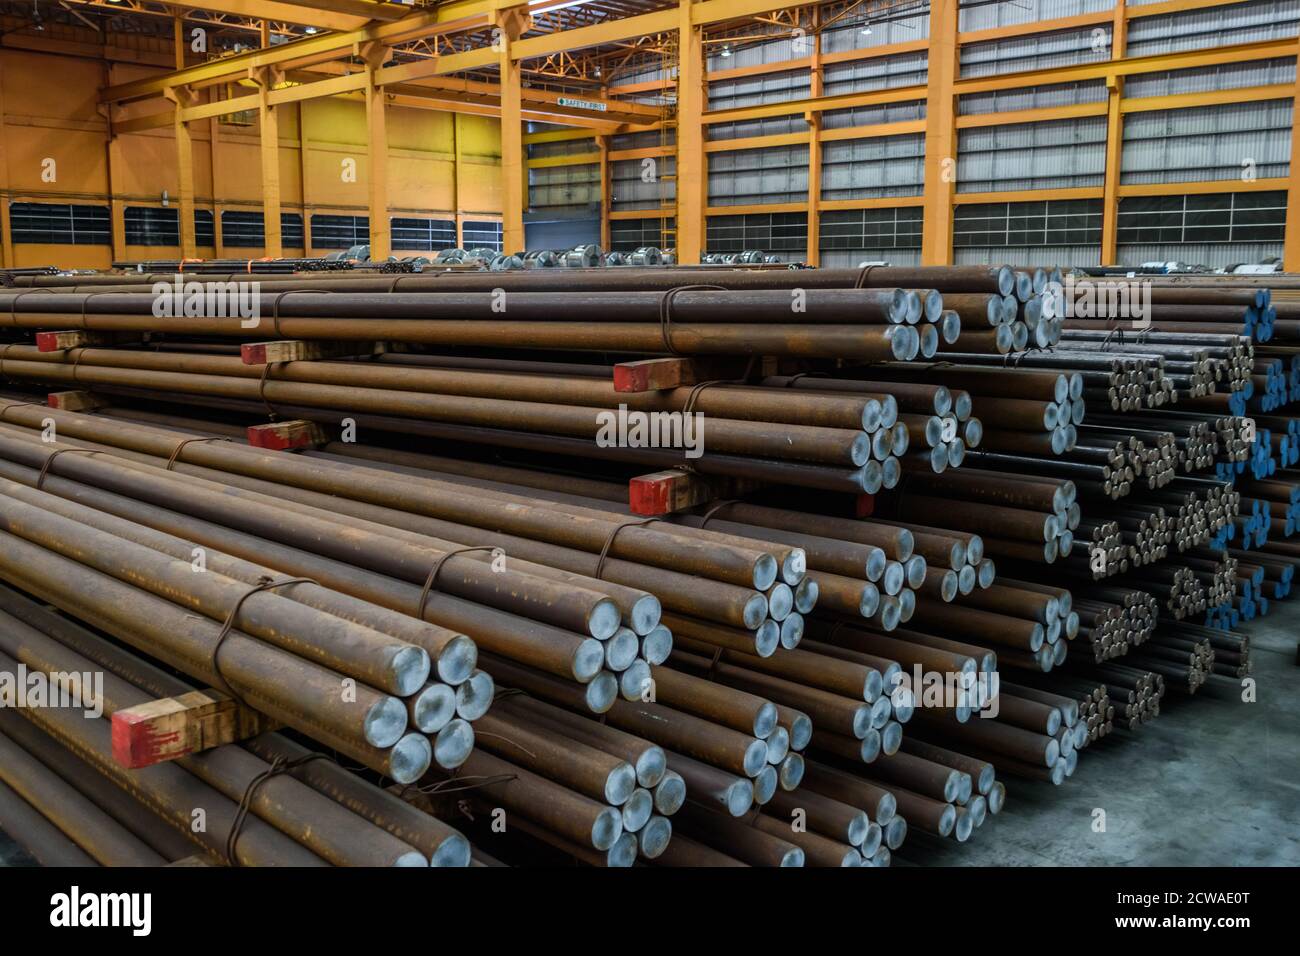 Steel round bar storage and stacking in a warehouse. Stock Photo